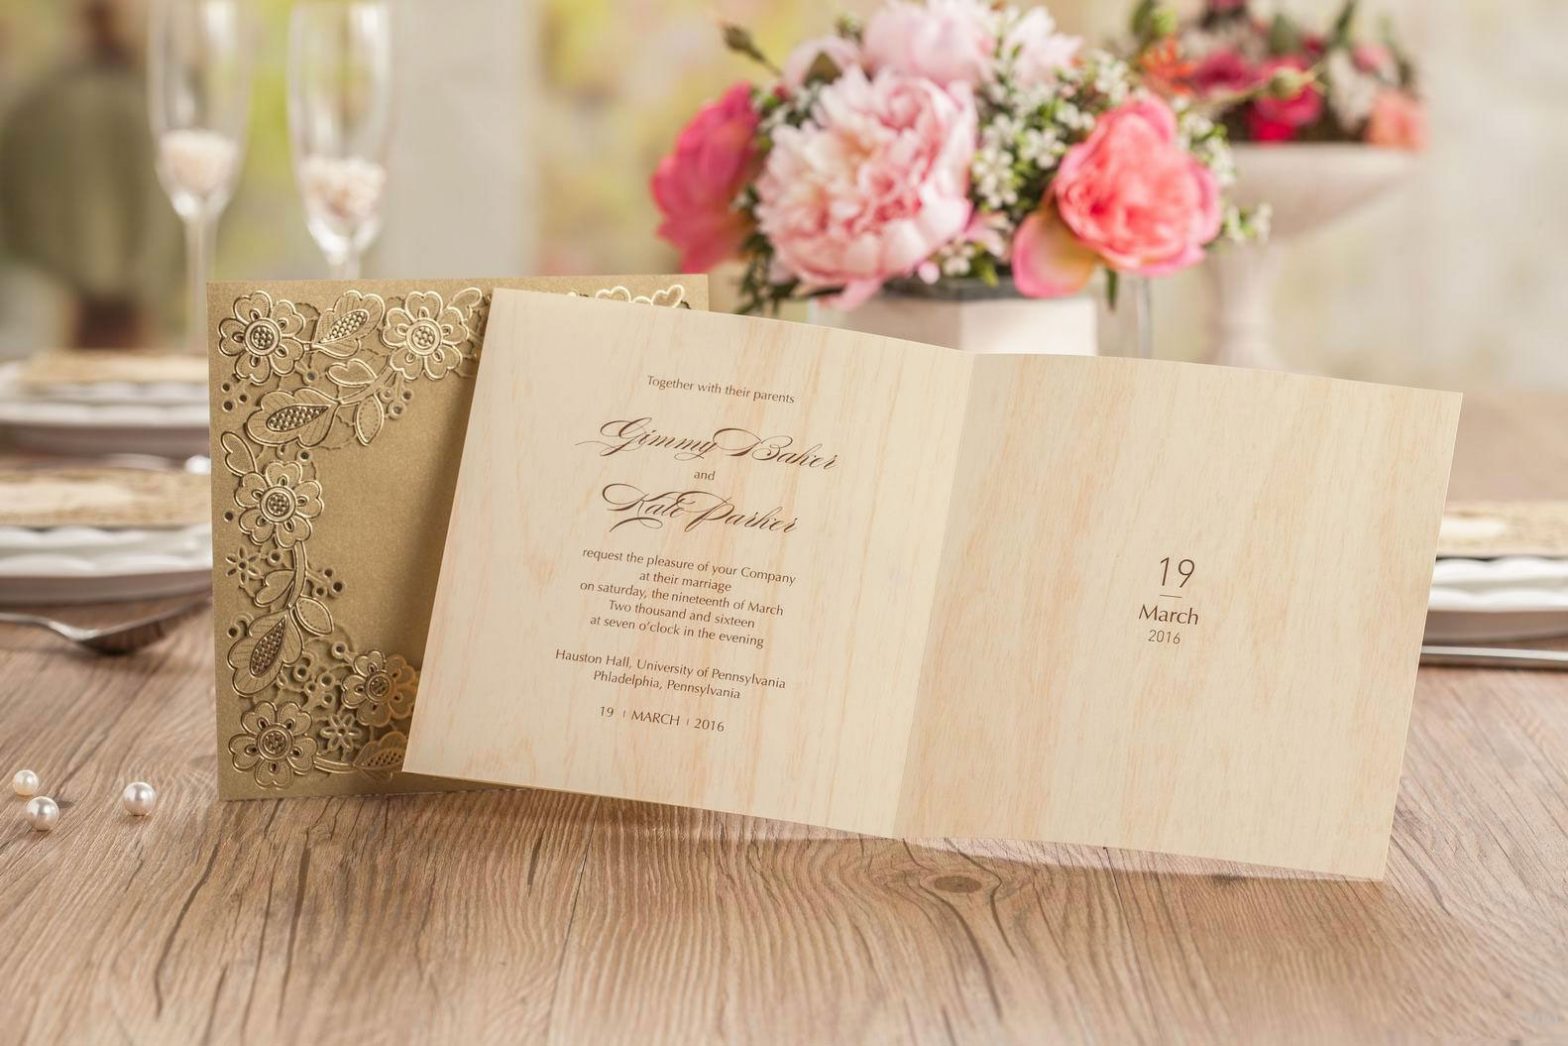 About Beautiful Wedding Invitations Promise You of a Unique Wedding. 